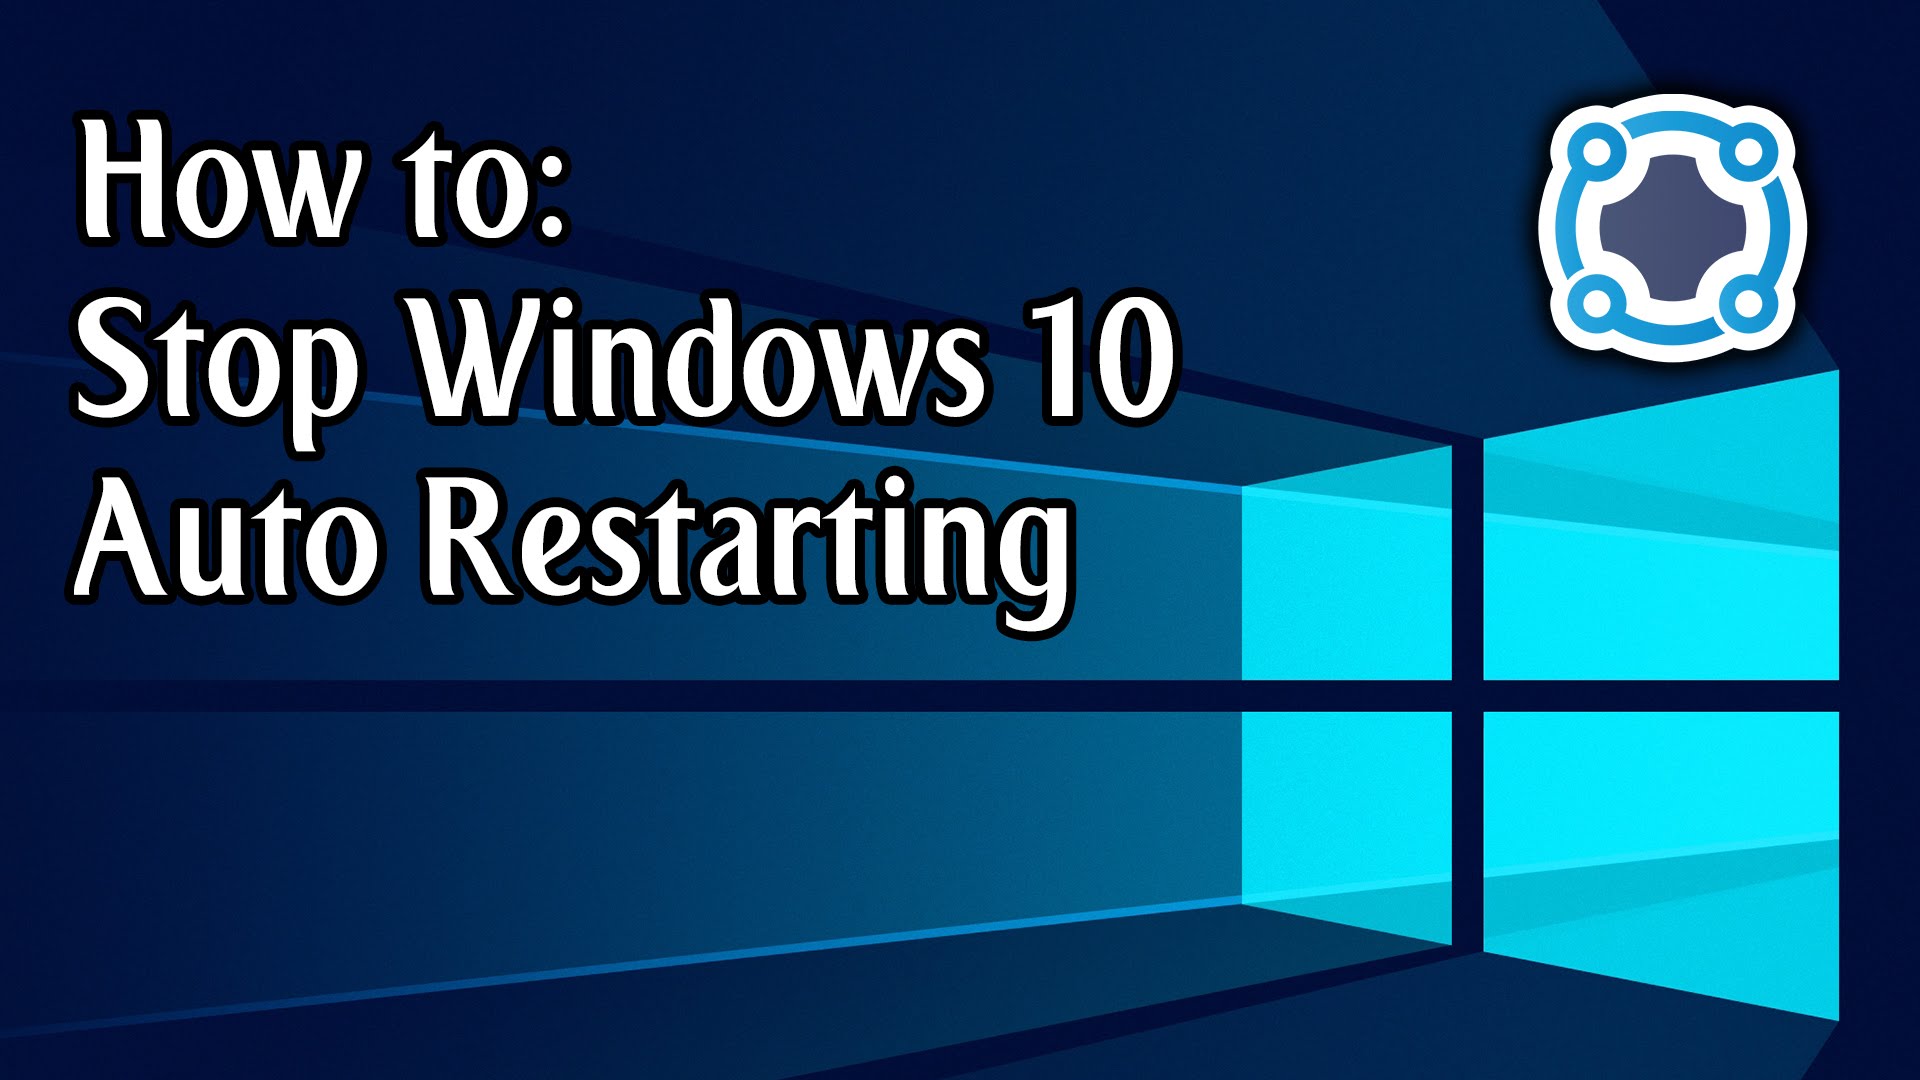 How To Stop Windows 10 Automatically Restarting